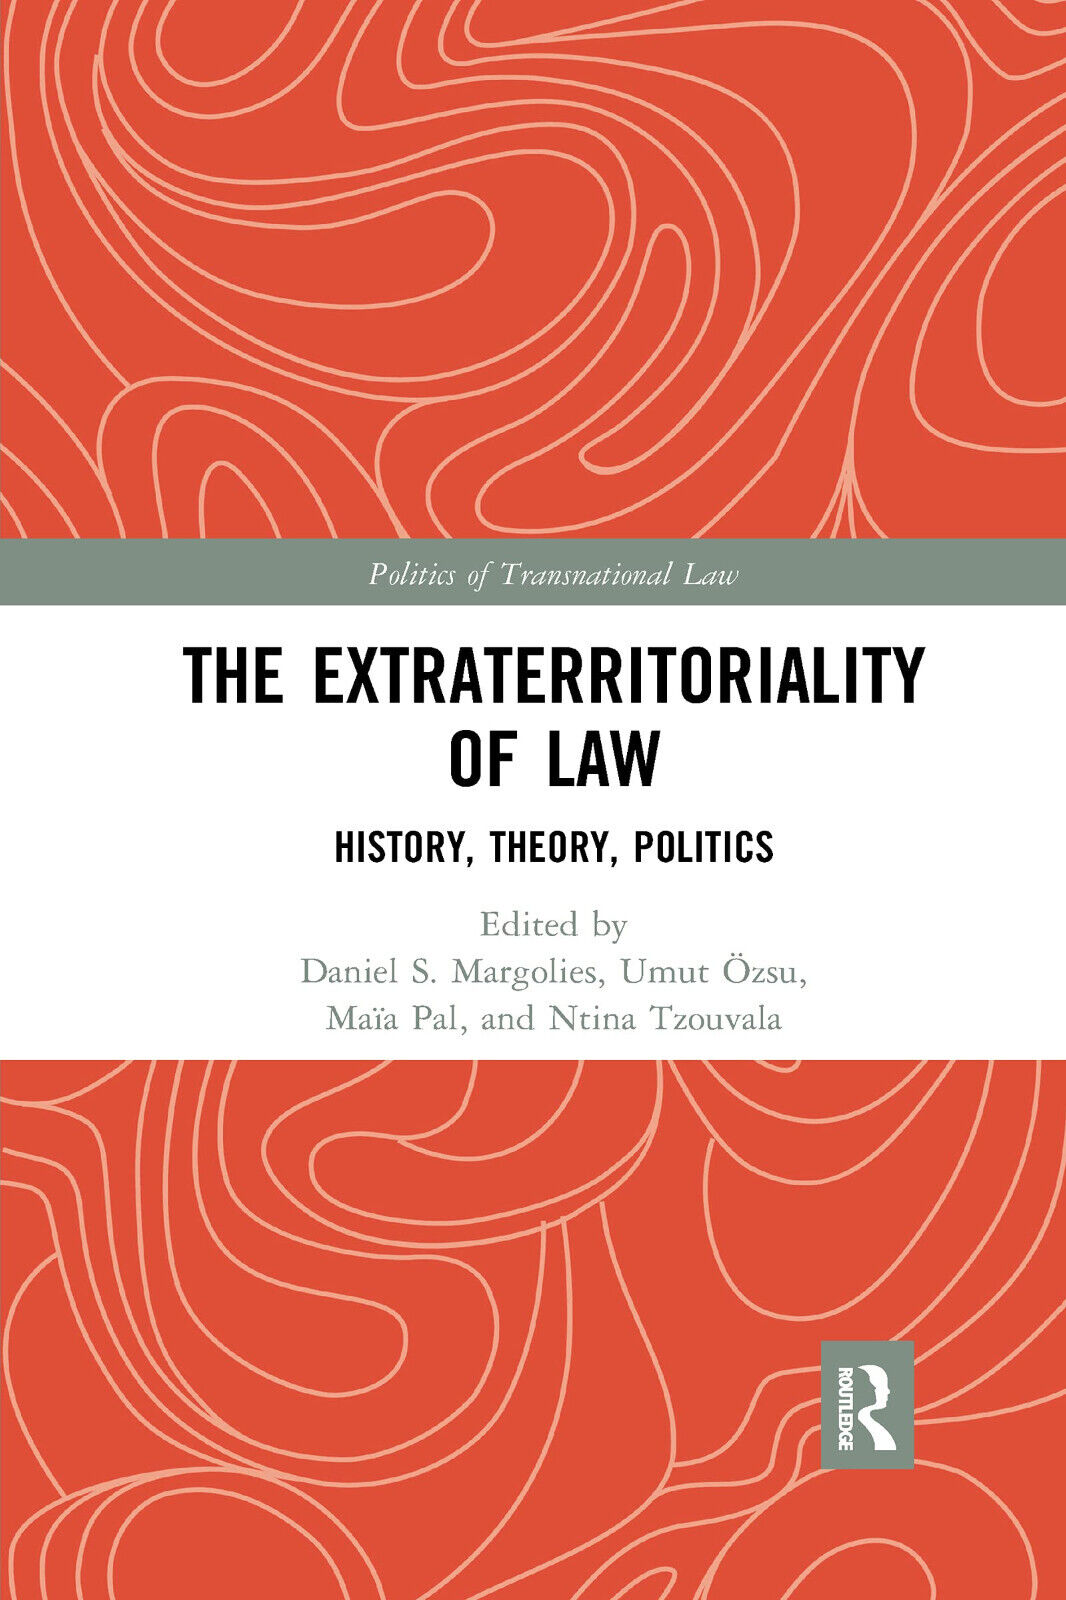 The Extraterritoriality Of Law - Daniel S. Margolies - Taylor & Francis Ltd,2021 libro usato